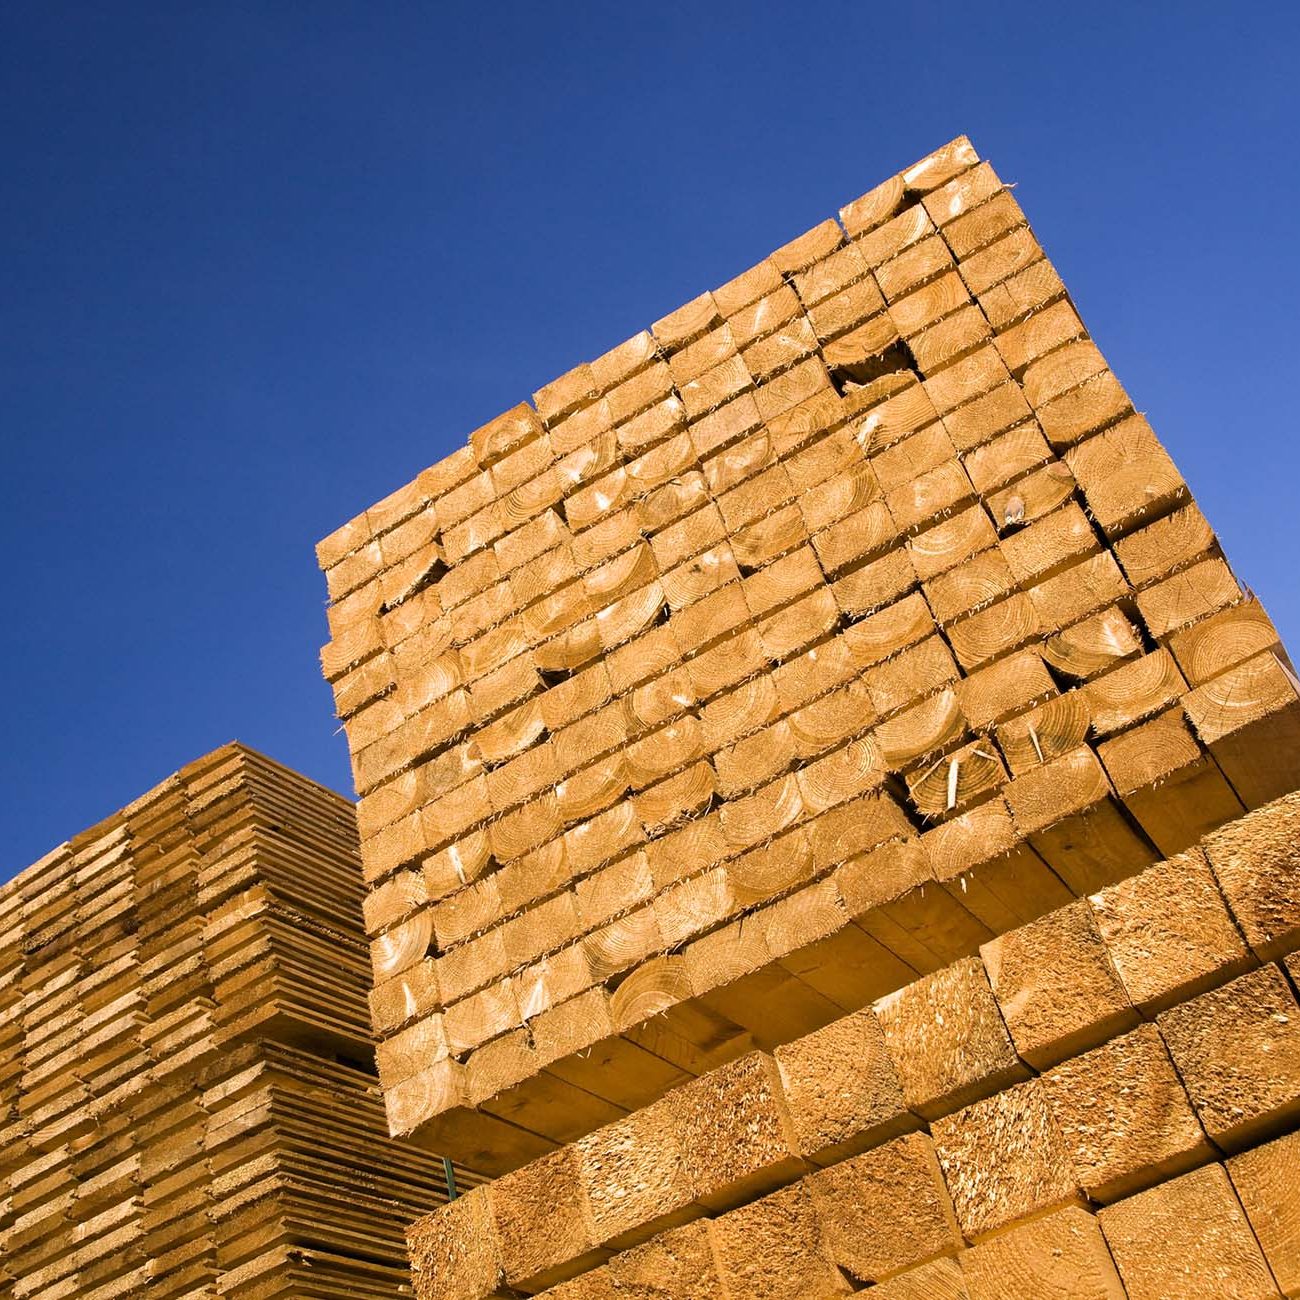 Low angle with of tall stack of cut wood or timber with blue sky background.